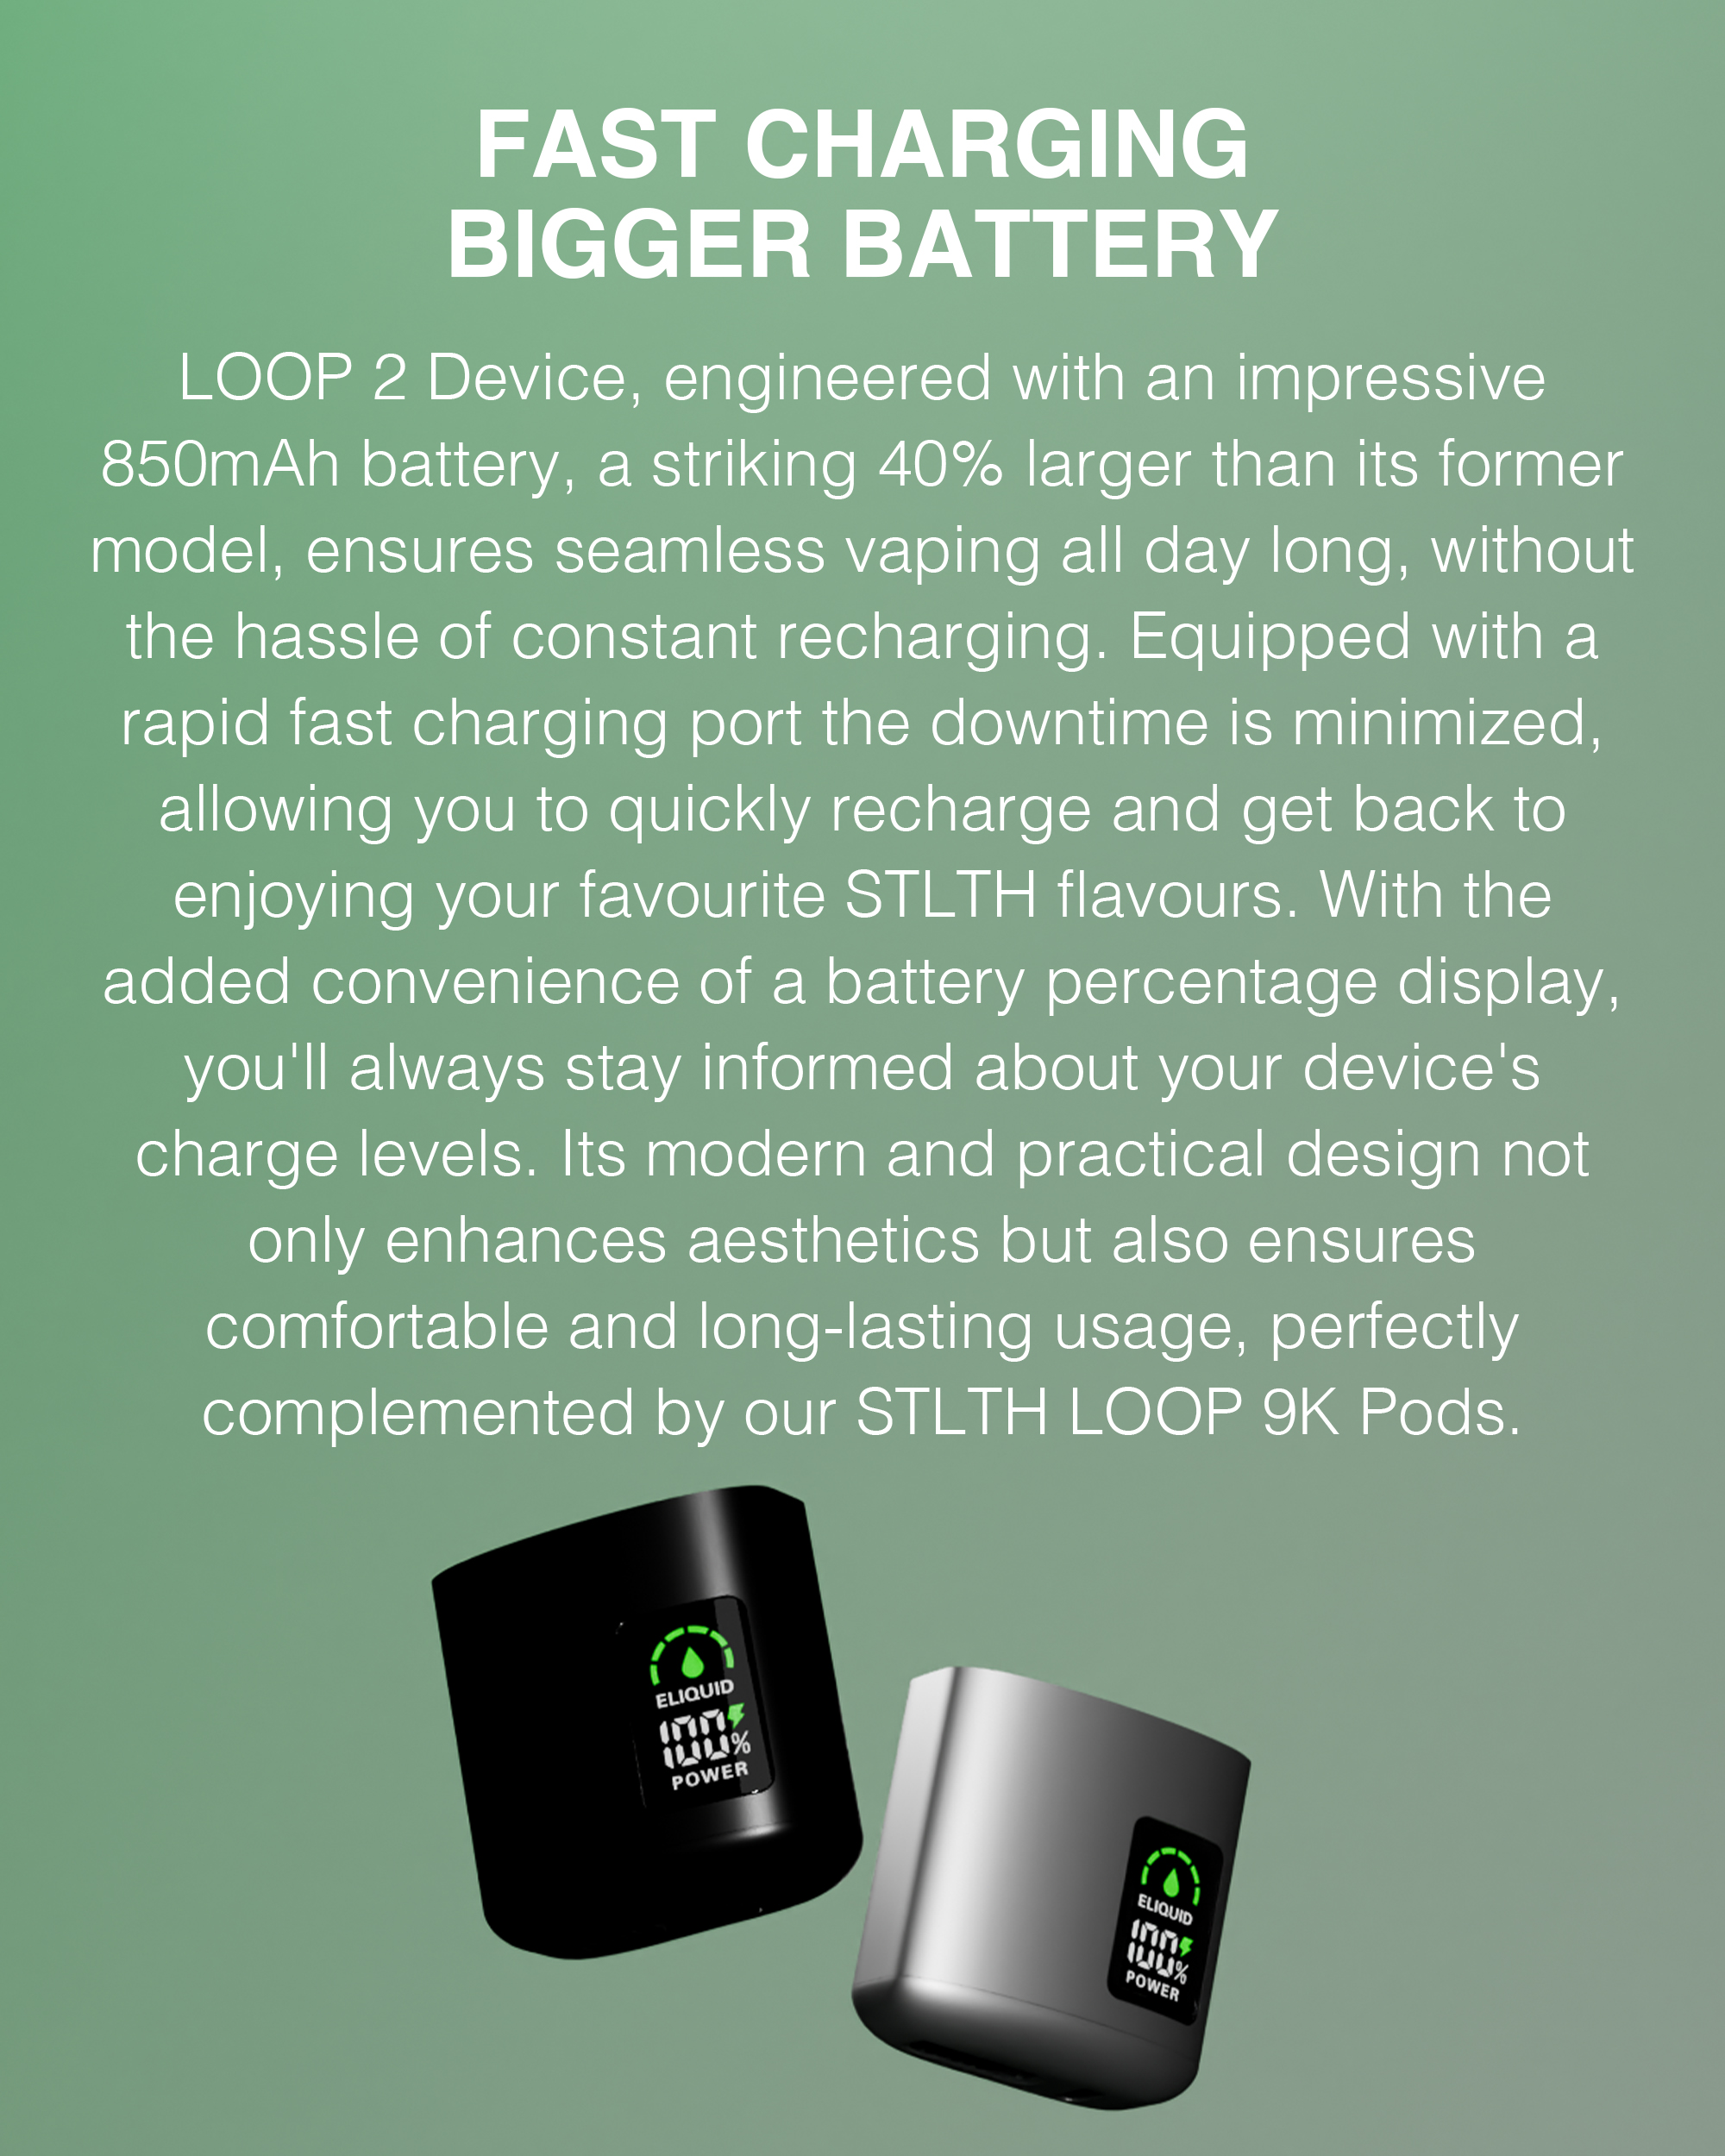 FAST CHARGING BIGGER BATTERY: Loop 2 Device, engineered with an impressive 850 mAh battery, a striking 40% larger than its former model, ensures seamless vaping all day long, without the hassle of constant recharging. Equipped with a rapid fast charging port the downtime is minimized, allowing you to quickly recharge and get back to enjoying your favourite STLTH flavours. With the added convenience of a battery percentage display, you'll always stay informed about your device's charge levels. Its modern and practical design not only enhances aesthetics but also ensures confortable and long-lasting usage, perfectly complemented by our STLTH LOOP 9K Pods.